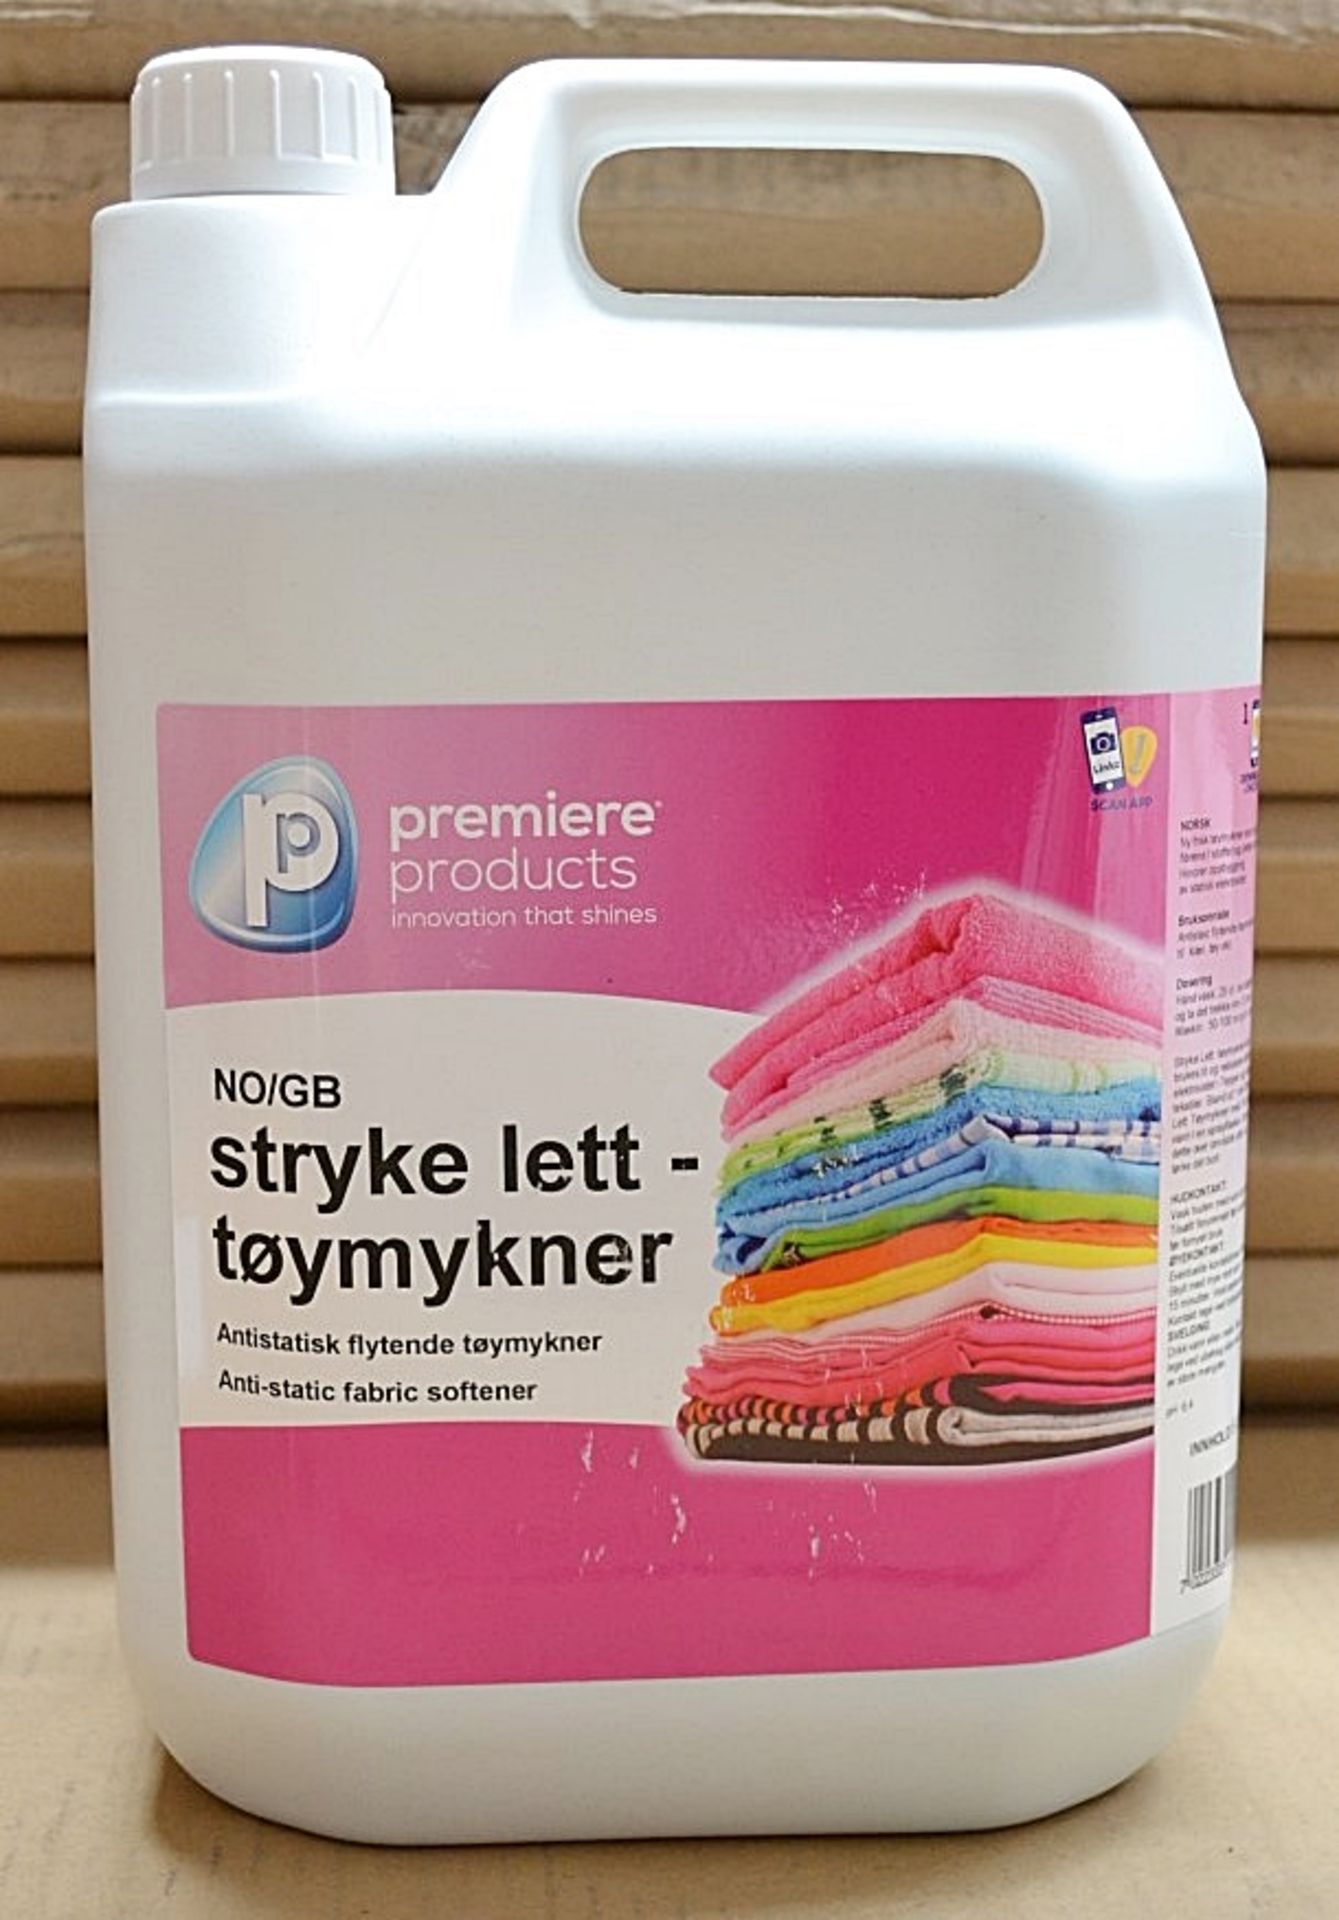 2 x 5ltr Premiere Products Easy Iron fabric conditioner - New Boxed Stock - CL083 - Ref 08062 - - Image 2 of 6